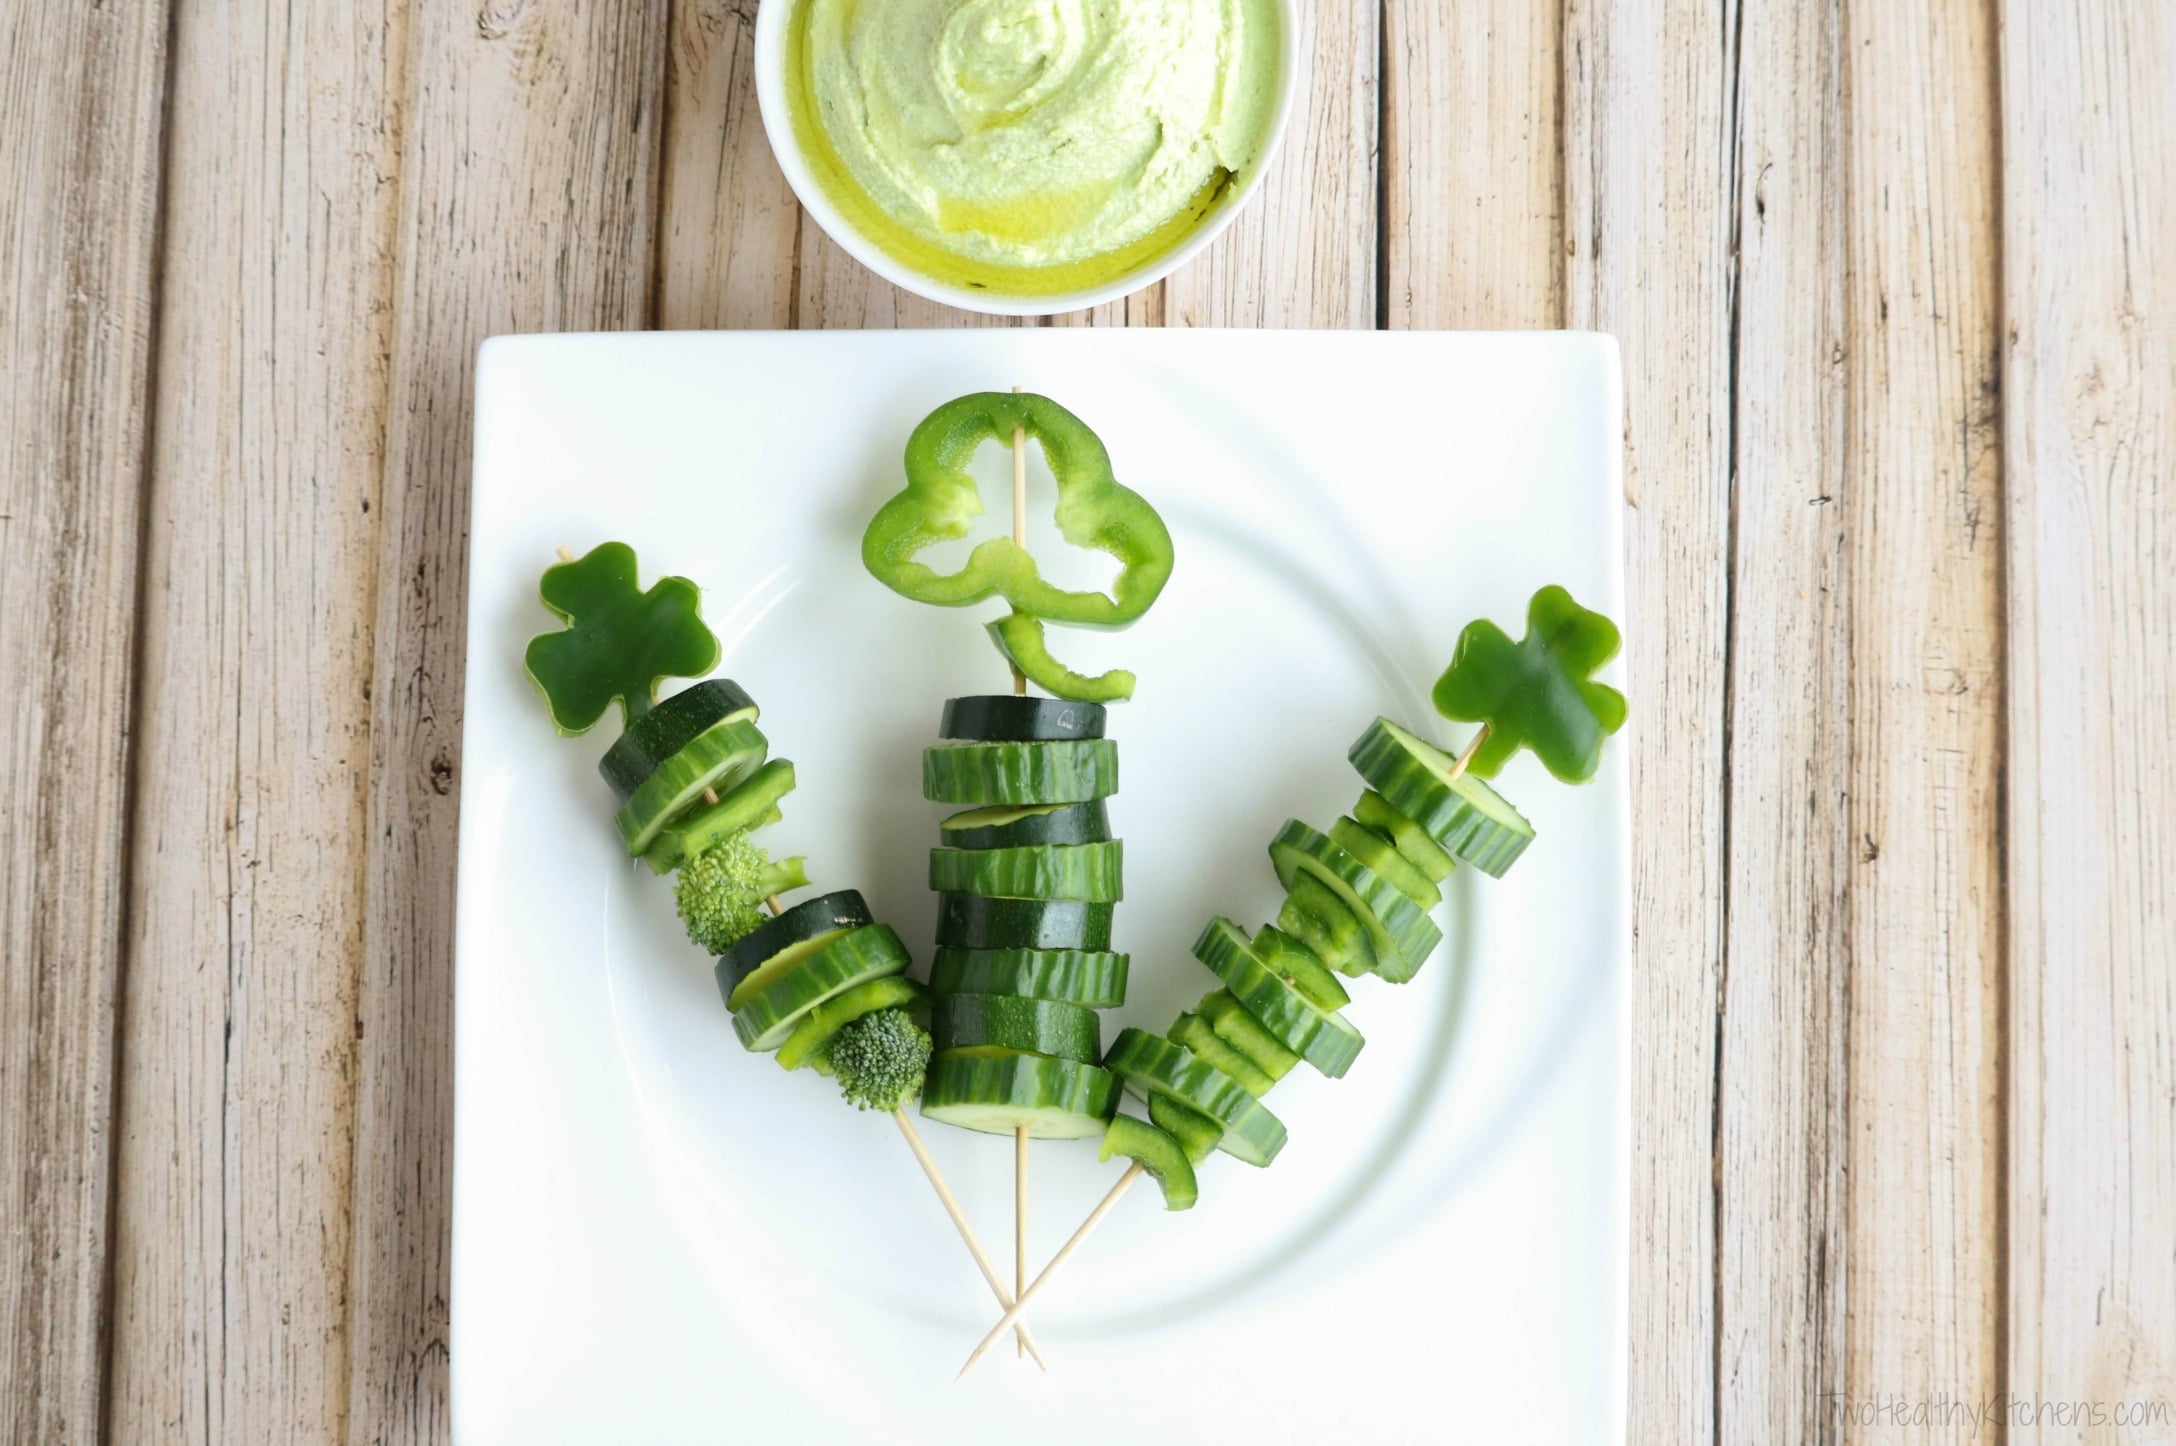 These easy Shamrock Veggie Skewers are a perfect St. Patrick's Day appetizer for parties - and a fun, healthy after-school snack! | www.TwoHealthyKitchens.com